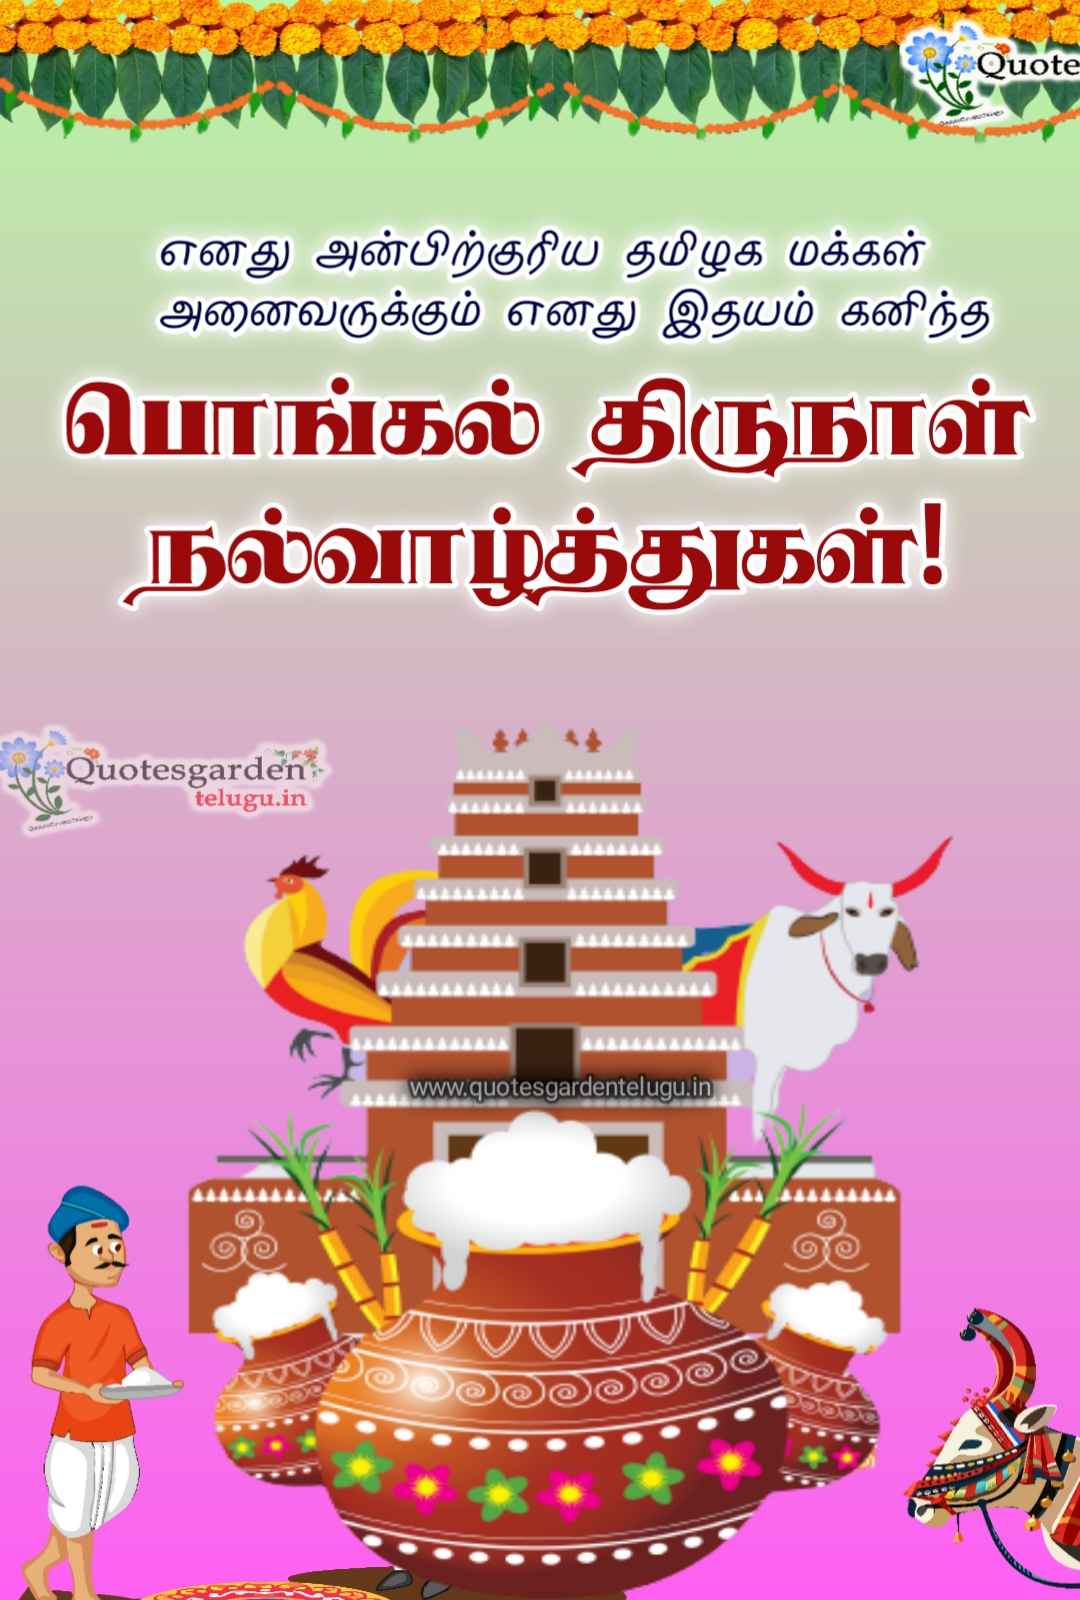 Pongal greetgs wishes images tamil quotes wallpapers quotes garden telugu telugu quotes english quotes hdi quotes